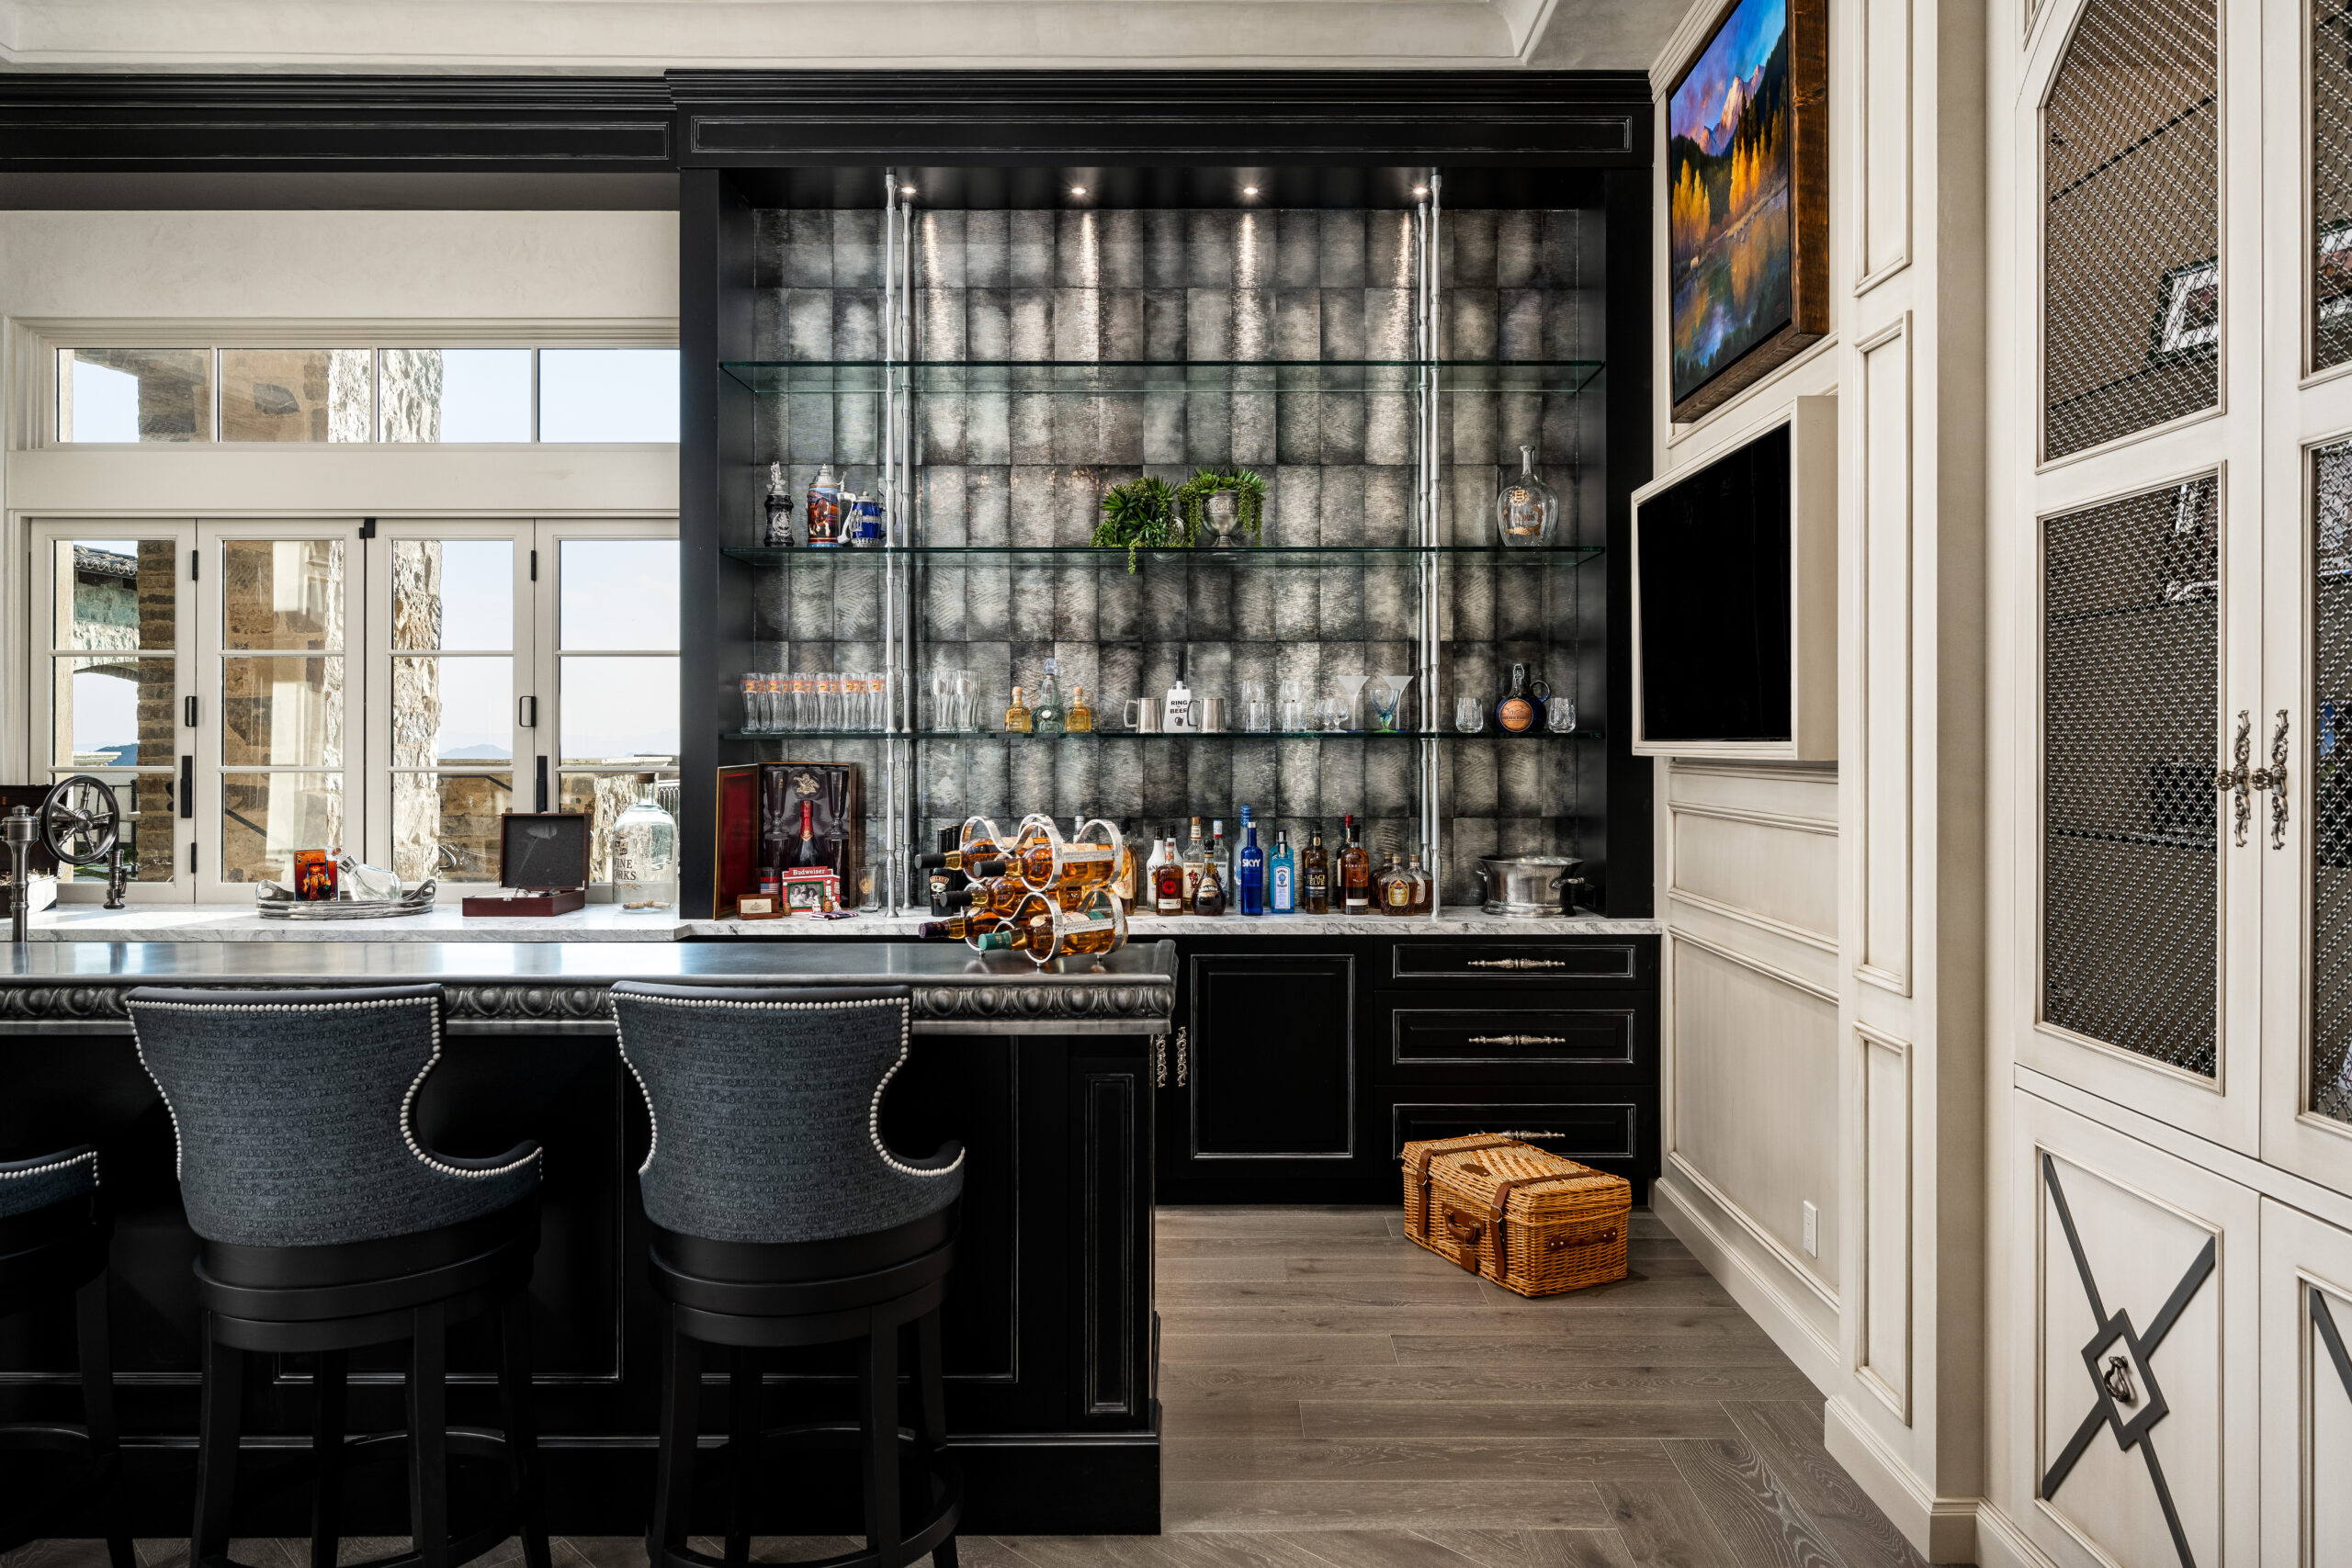 Close-Up of Home Bar Shelving and Counter: A close-up view of the home bar, highlighting the glass shelves displaying various bottles, a dark countertop, and bar stools. The backdrop is a textured grey wall with modern lighting, and there are cabinets with glass doors for additional storage.